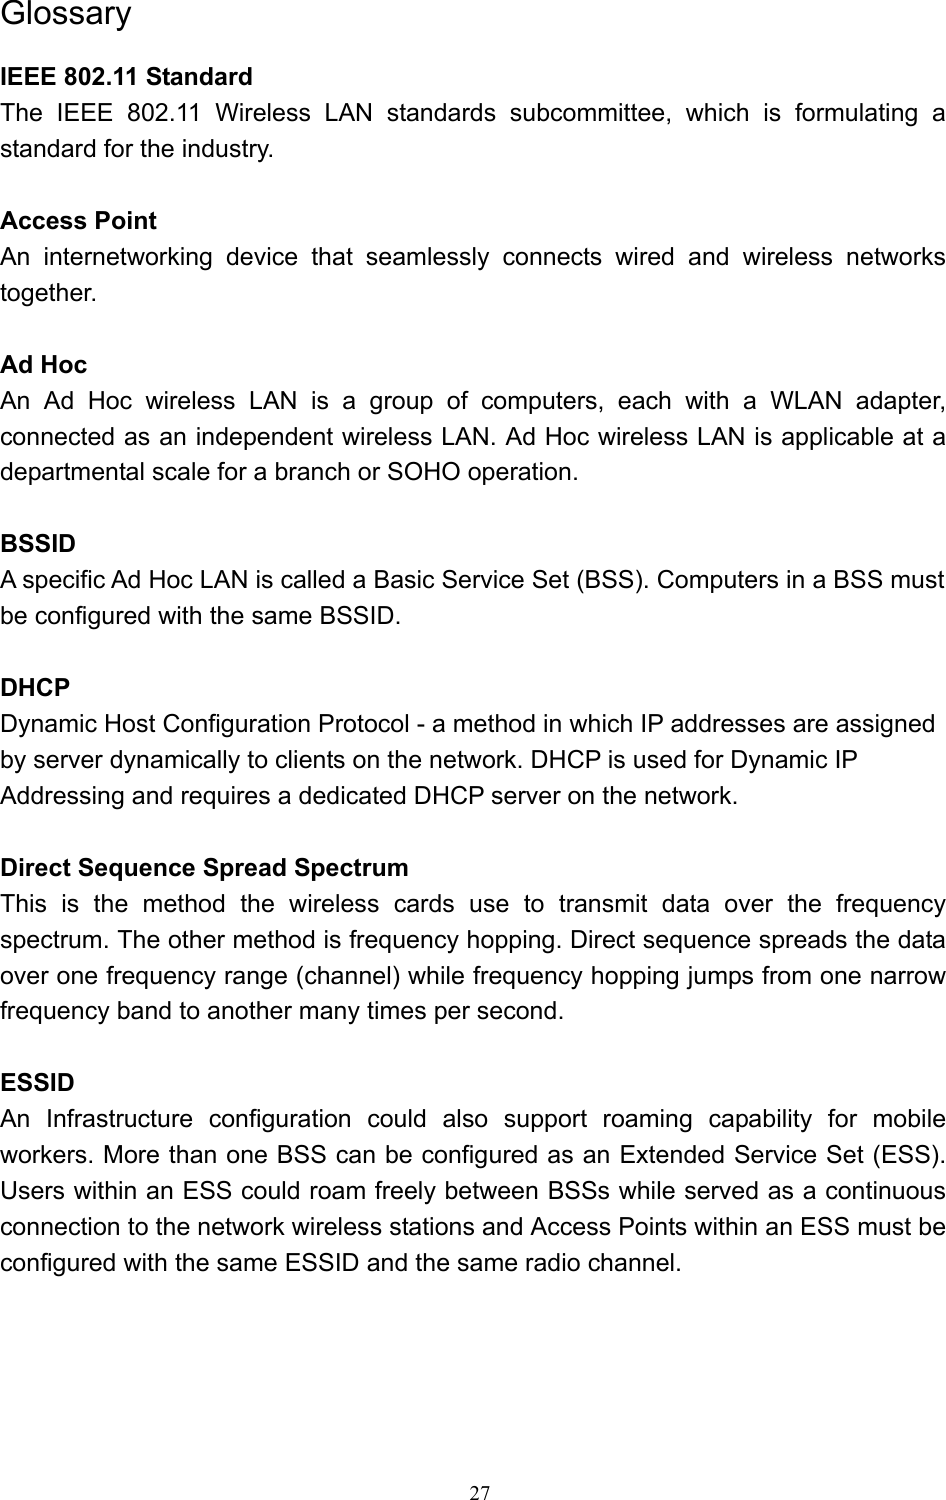   27 Glossary IEEE 802.11 Standard The IEEE 802.11 Wireless LAN standards subcommittee, which is formulating a standard for the industry.  Access Point An internetworking device that seamlessly connects wired and wireless networks together.  Ad Hoc   An Ad Hoc wireless LAN is a group of computers, each with a WLAN adapter, connected as an independent wireless LAN. Ad Hoc wireless LAN is applicable at a departmental scale for a branch or SOHO operation.  BSSID A specific Ad Hoc LAN is called a Basic Service Set (BSS). Computers in a BSS must be configured with the same BSSID.  DHCP Dynamic Host Configuration Protocol - a method in which IP addresses are assigned by server dynamically to clients on the network. DHCP is used for Dynamic IP Addressing and requires a dedicated DHCP server on the network.  Direct Sequence Spread Spectrum This is the method the wireless cards use to transmit data over the frequency spectrum. The other method is frequency hopping. Direct sequence spreads the data over one frequency range (channel) while frequency hopping jumps from one narrow frequency band to another many times per second.  ESSID An Infrastructure configuration could also support roaming capability for mobile workers. More than one BSS can be configured as an Extended Service Set (ESS). Users within an ESS could roam freely between BSSs while served as a continuous connection to the network wireless stations and Access Points within an ESS must be configured with the same ESSID and the same radio channel.    